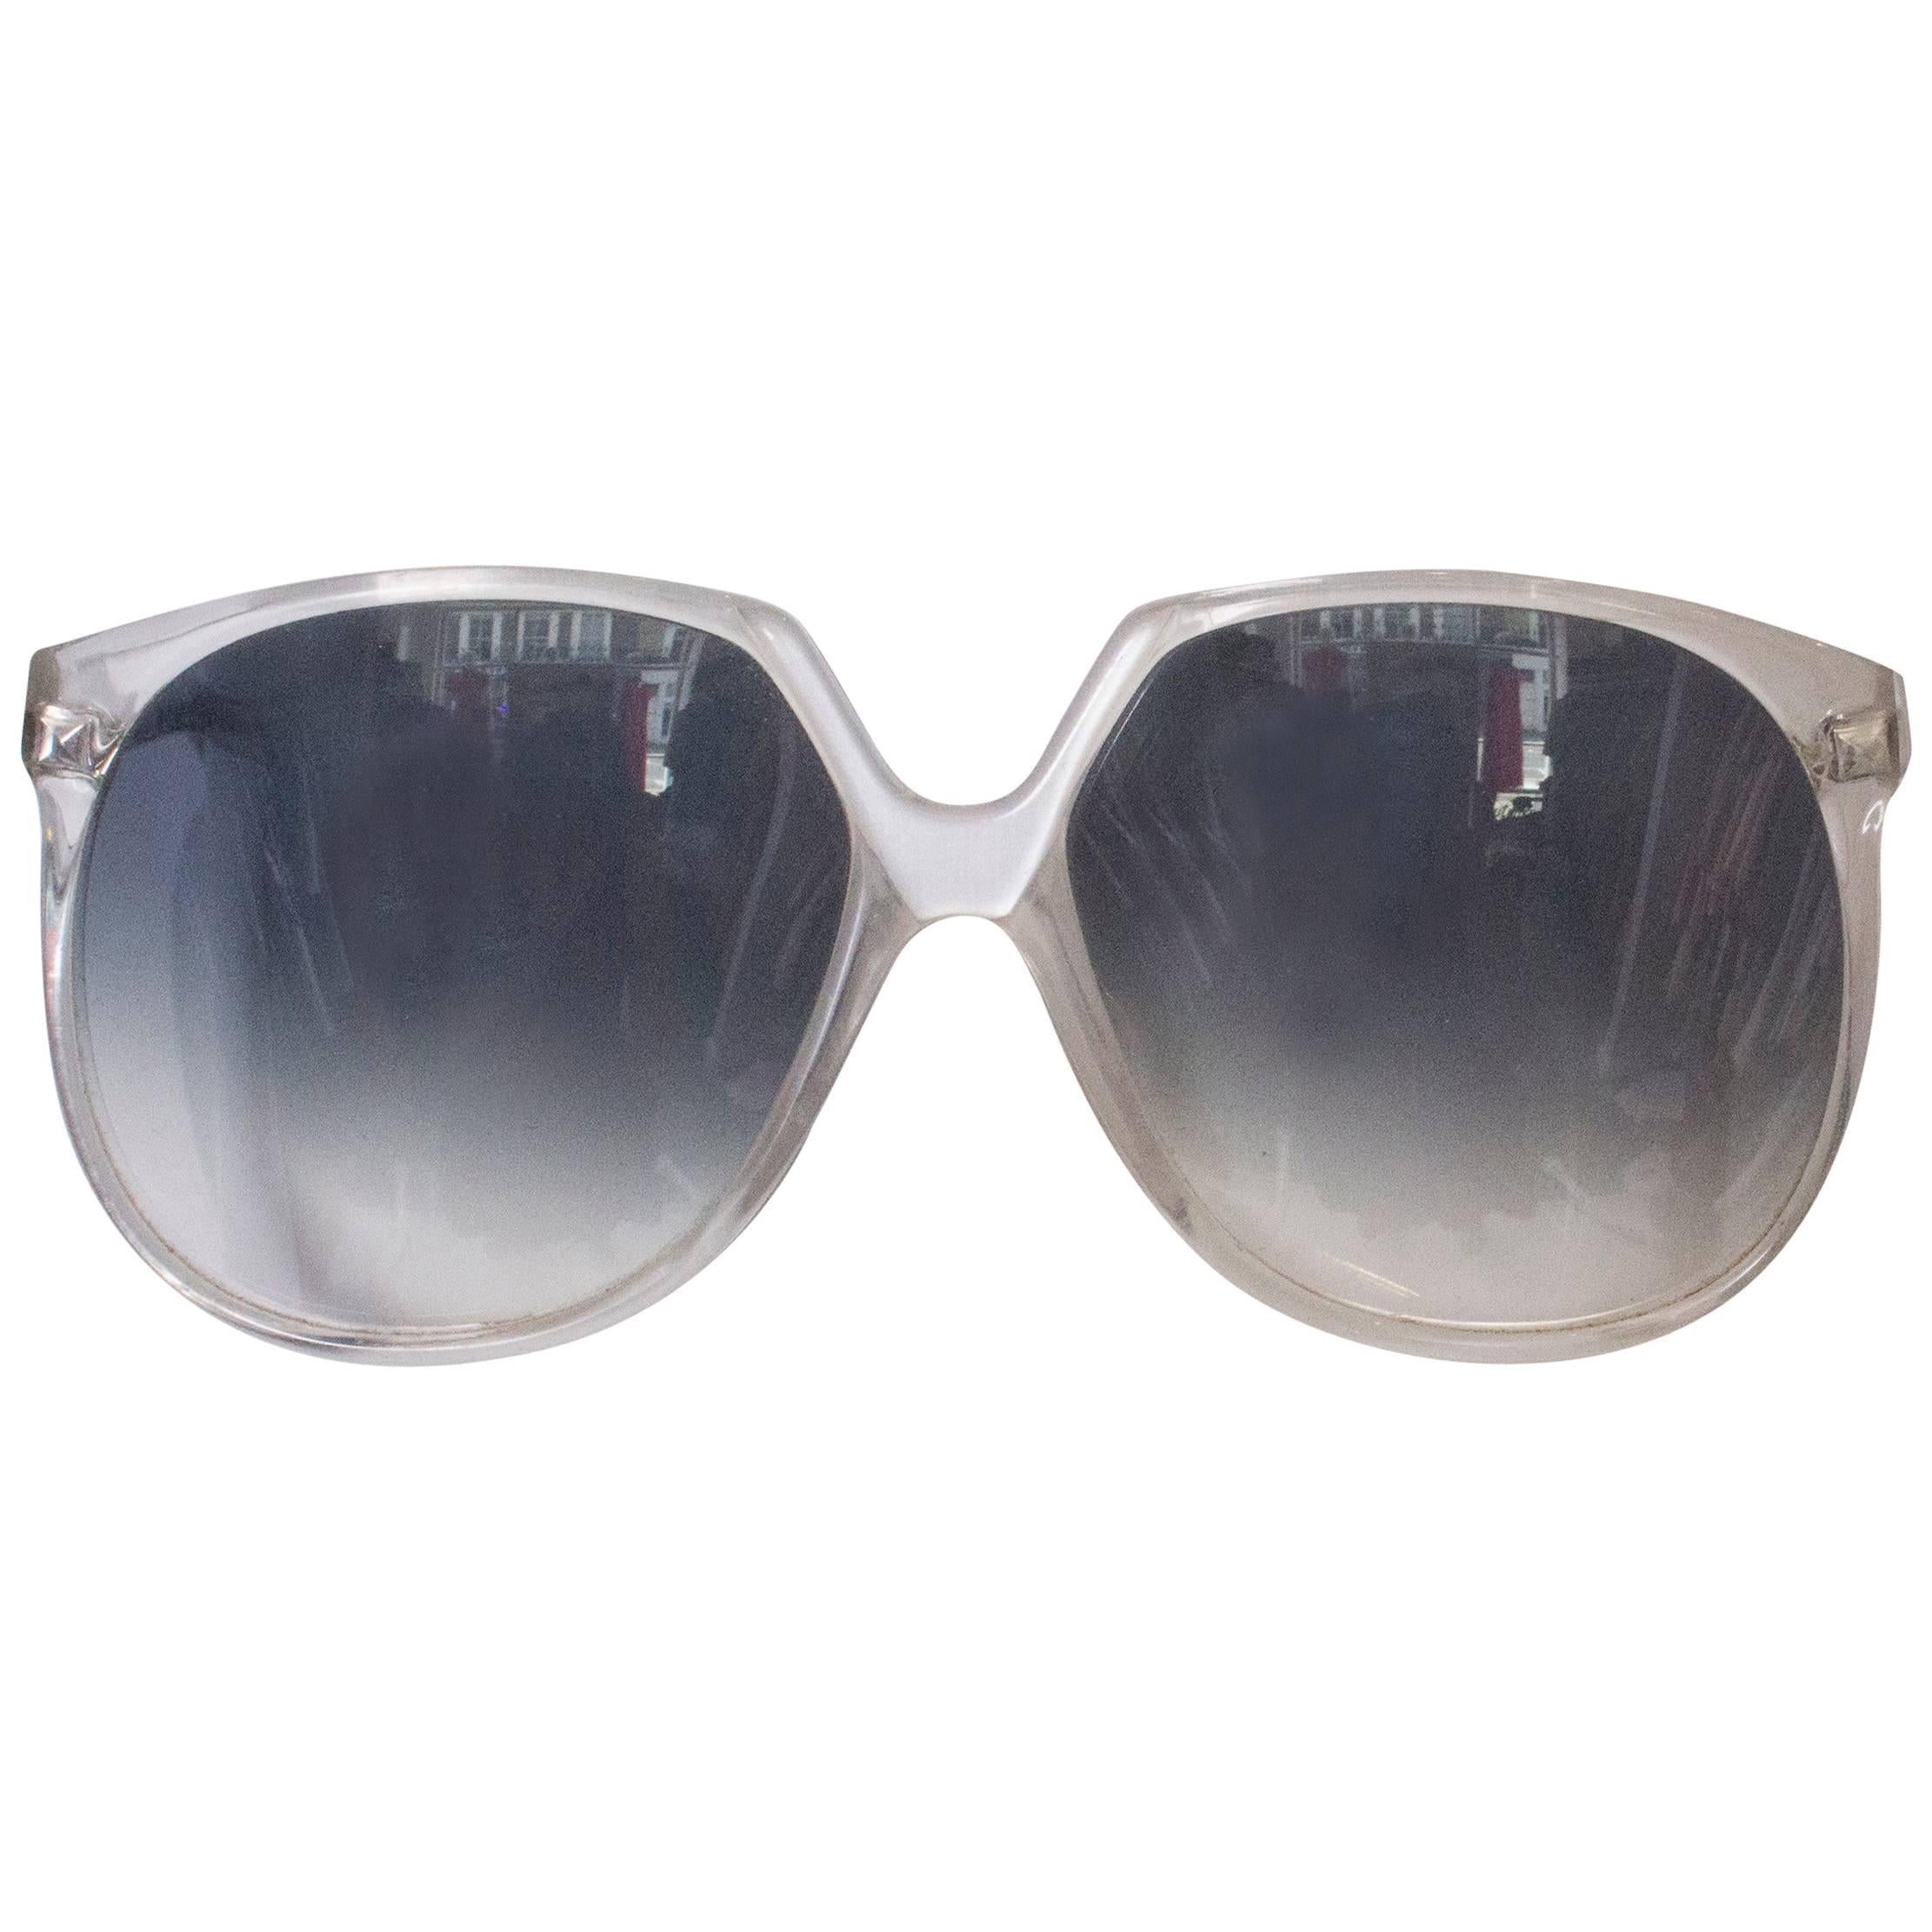 A pair of Vintage 1970s Sunglasses with White Frames